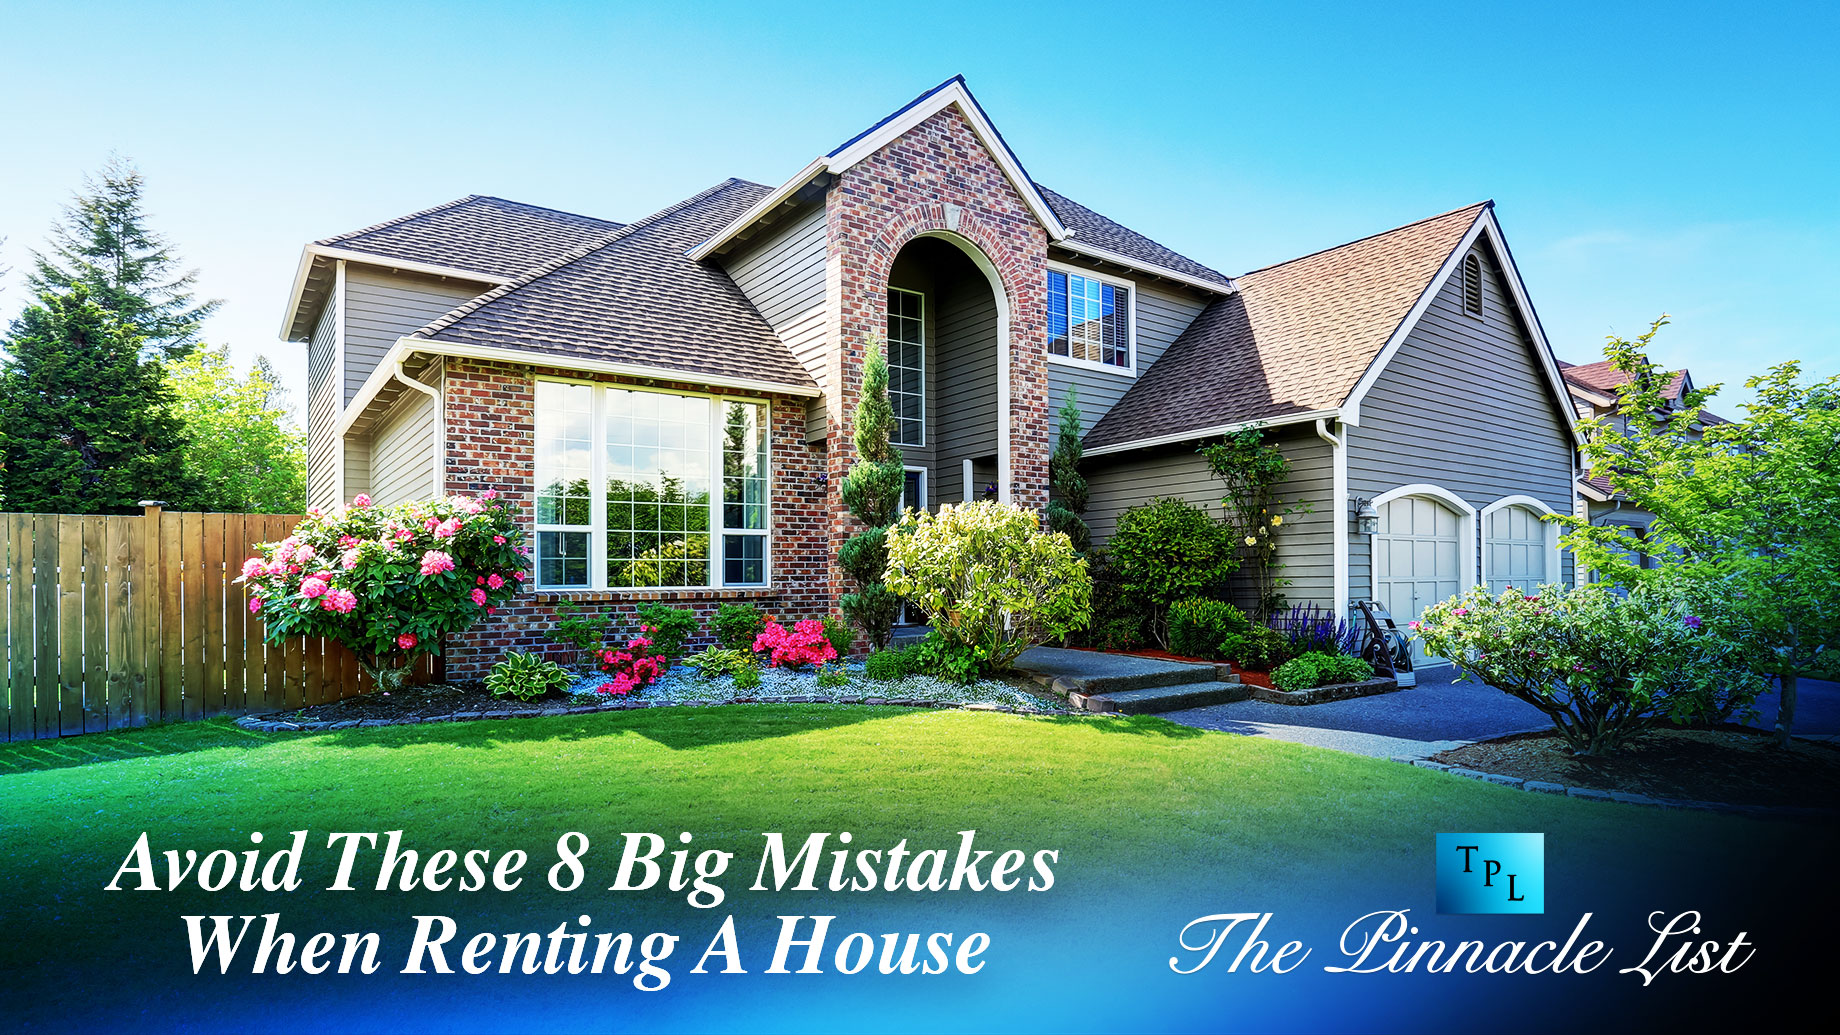 Avoid These 8 Big Mistakes When Renting A House